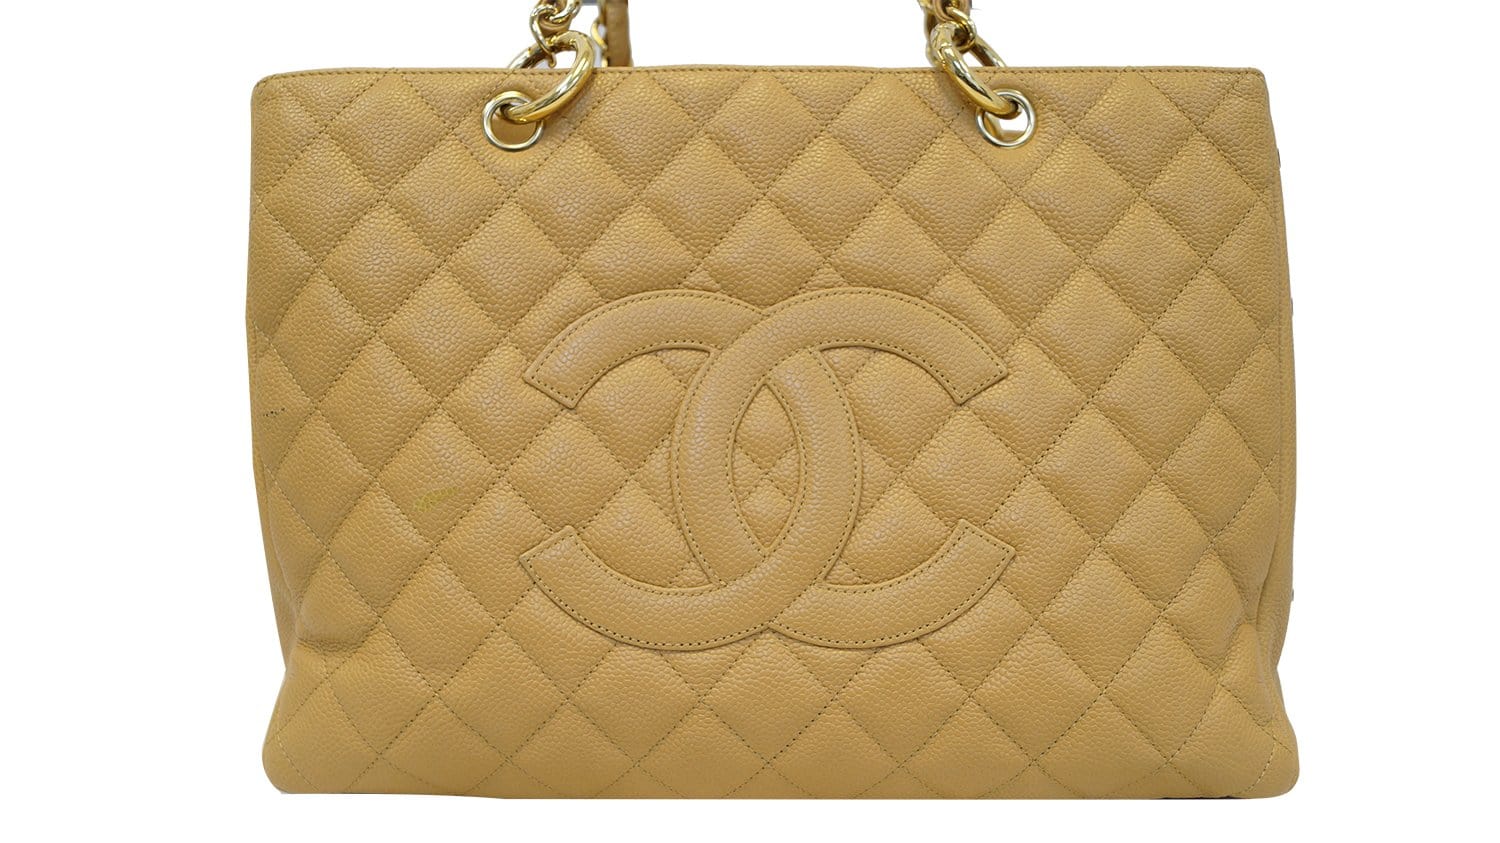 CHANEL Beige Caviar Leather Shopping Tote Bag